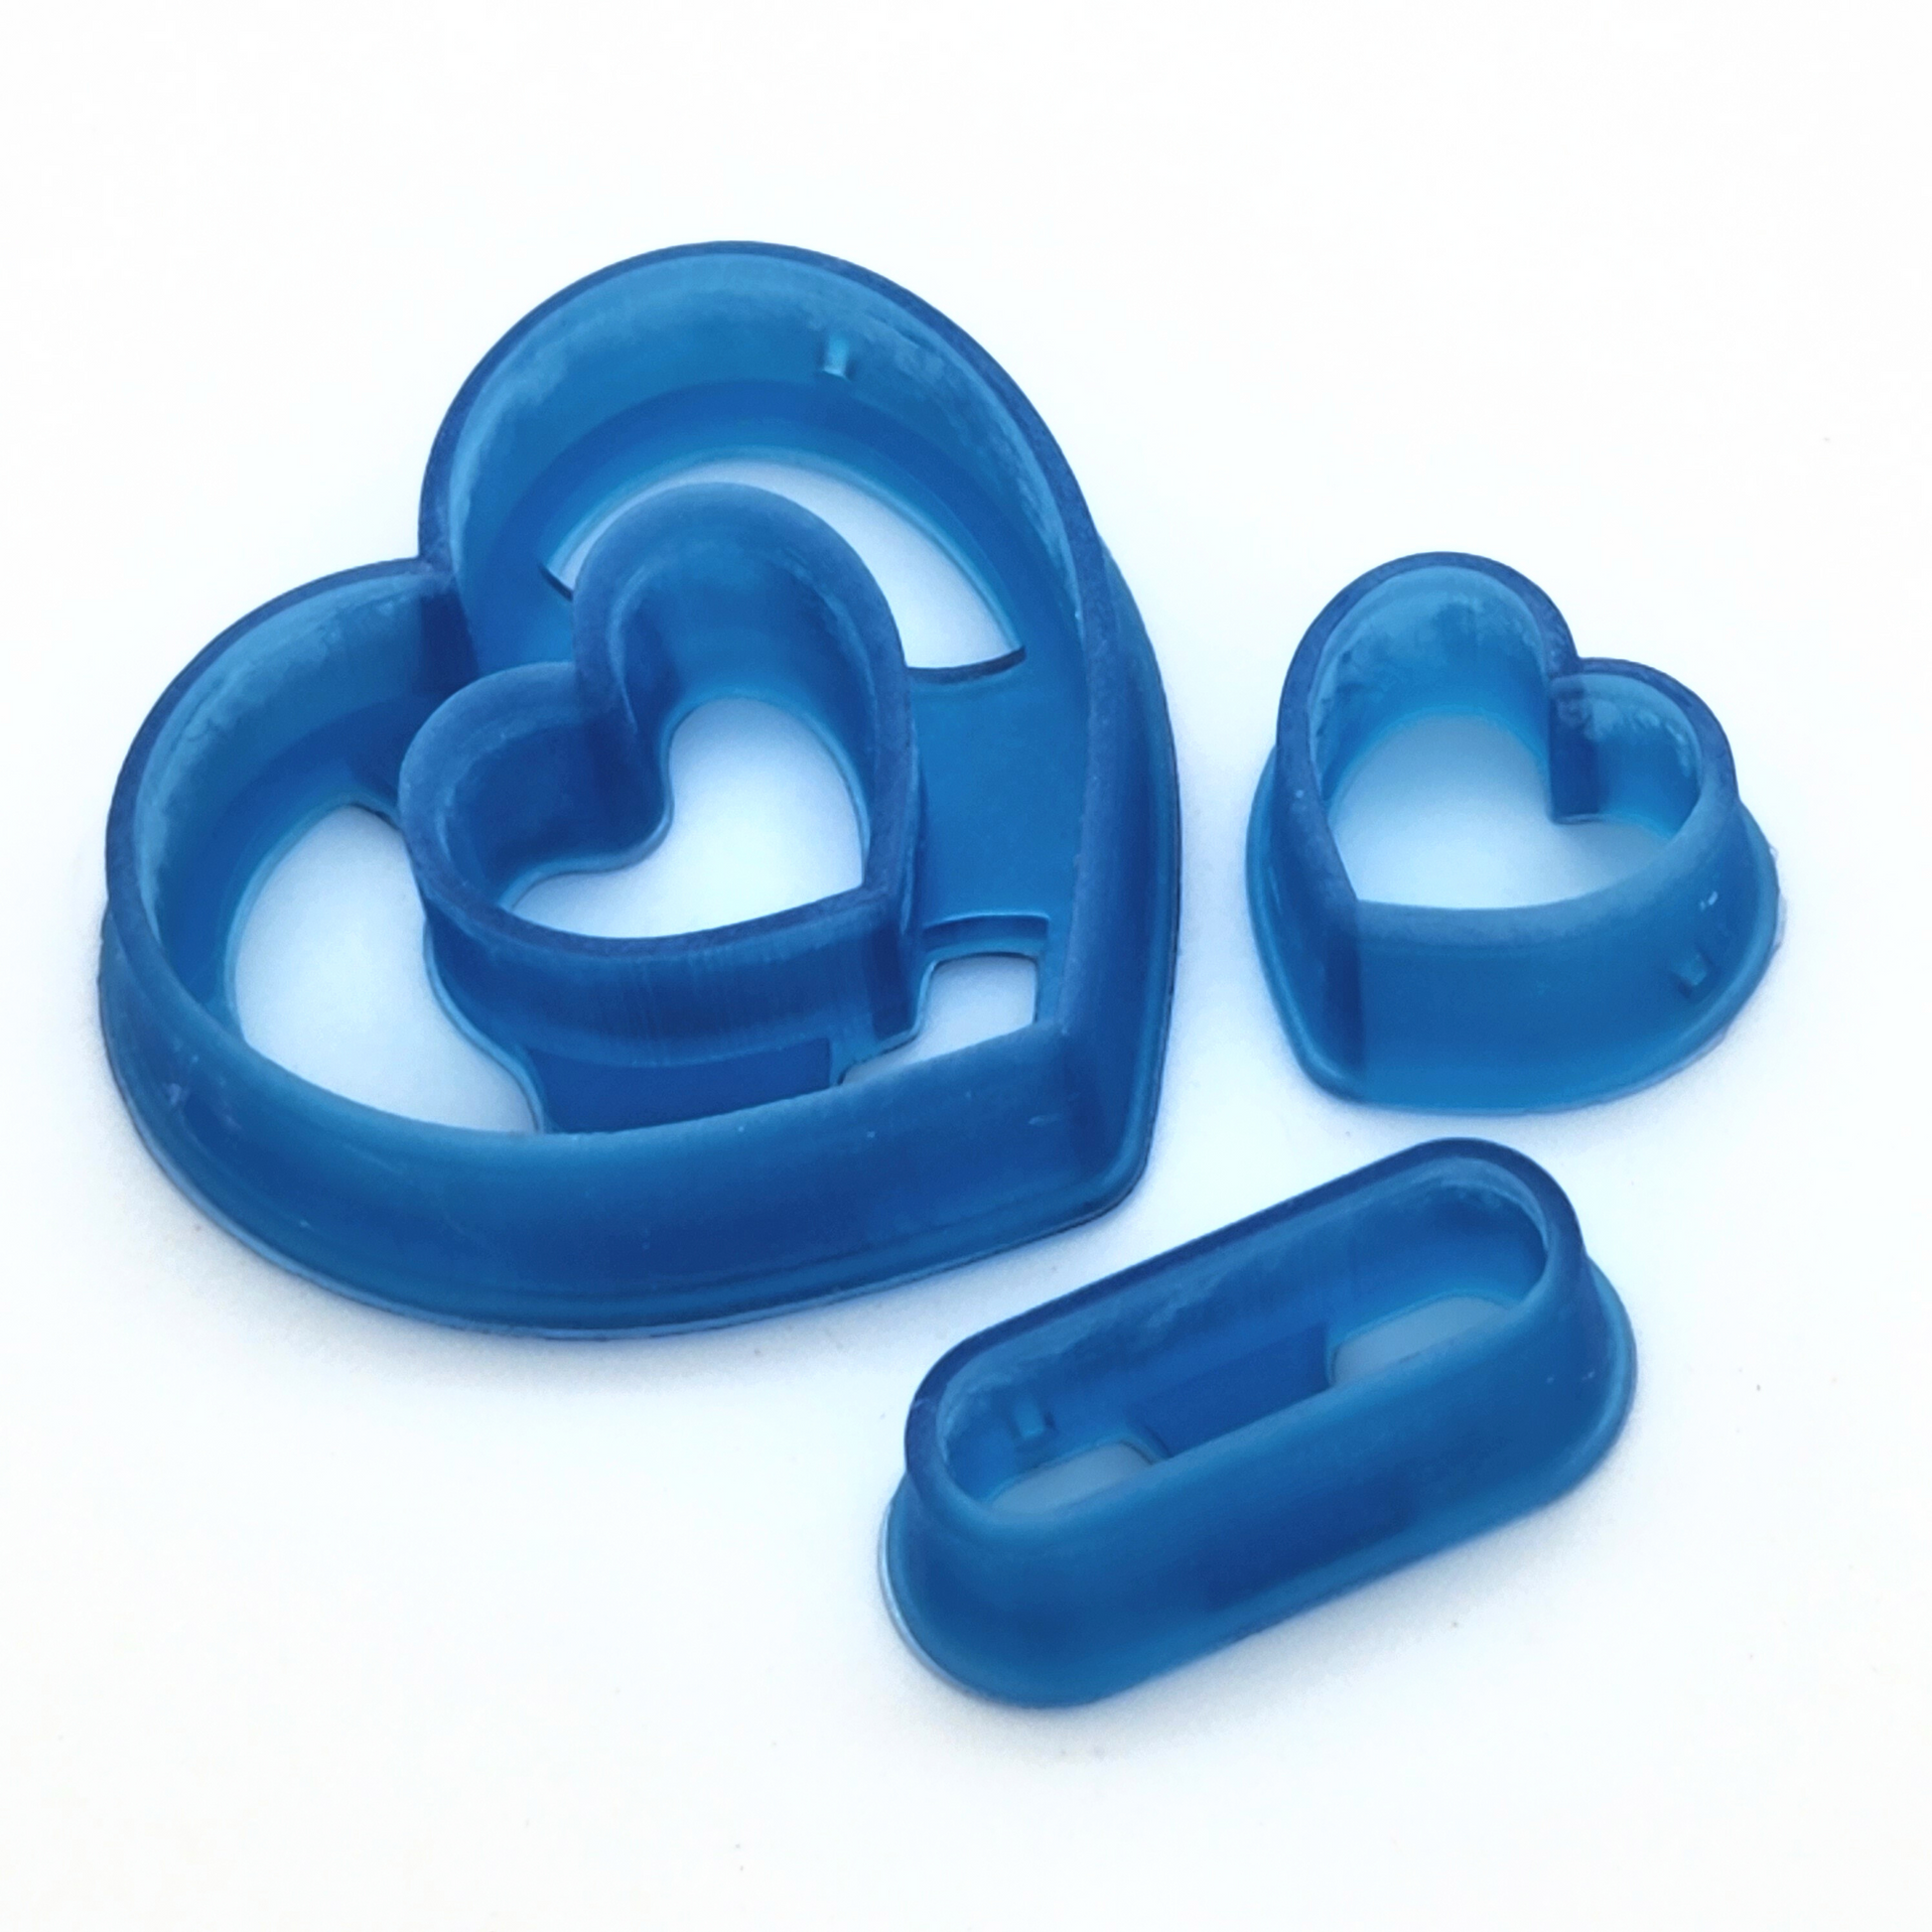 3D printed, sharp edge, three set piece chelsea heart clay cutter, made of resin